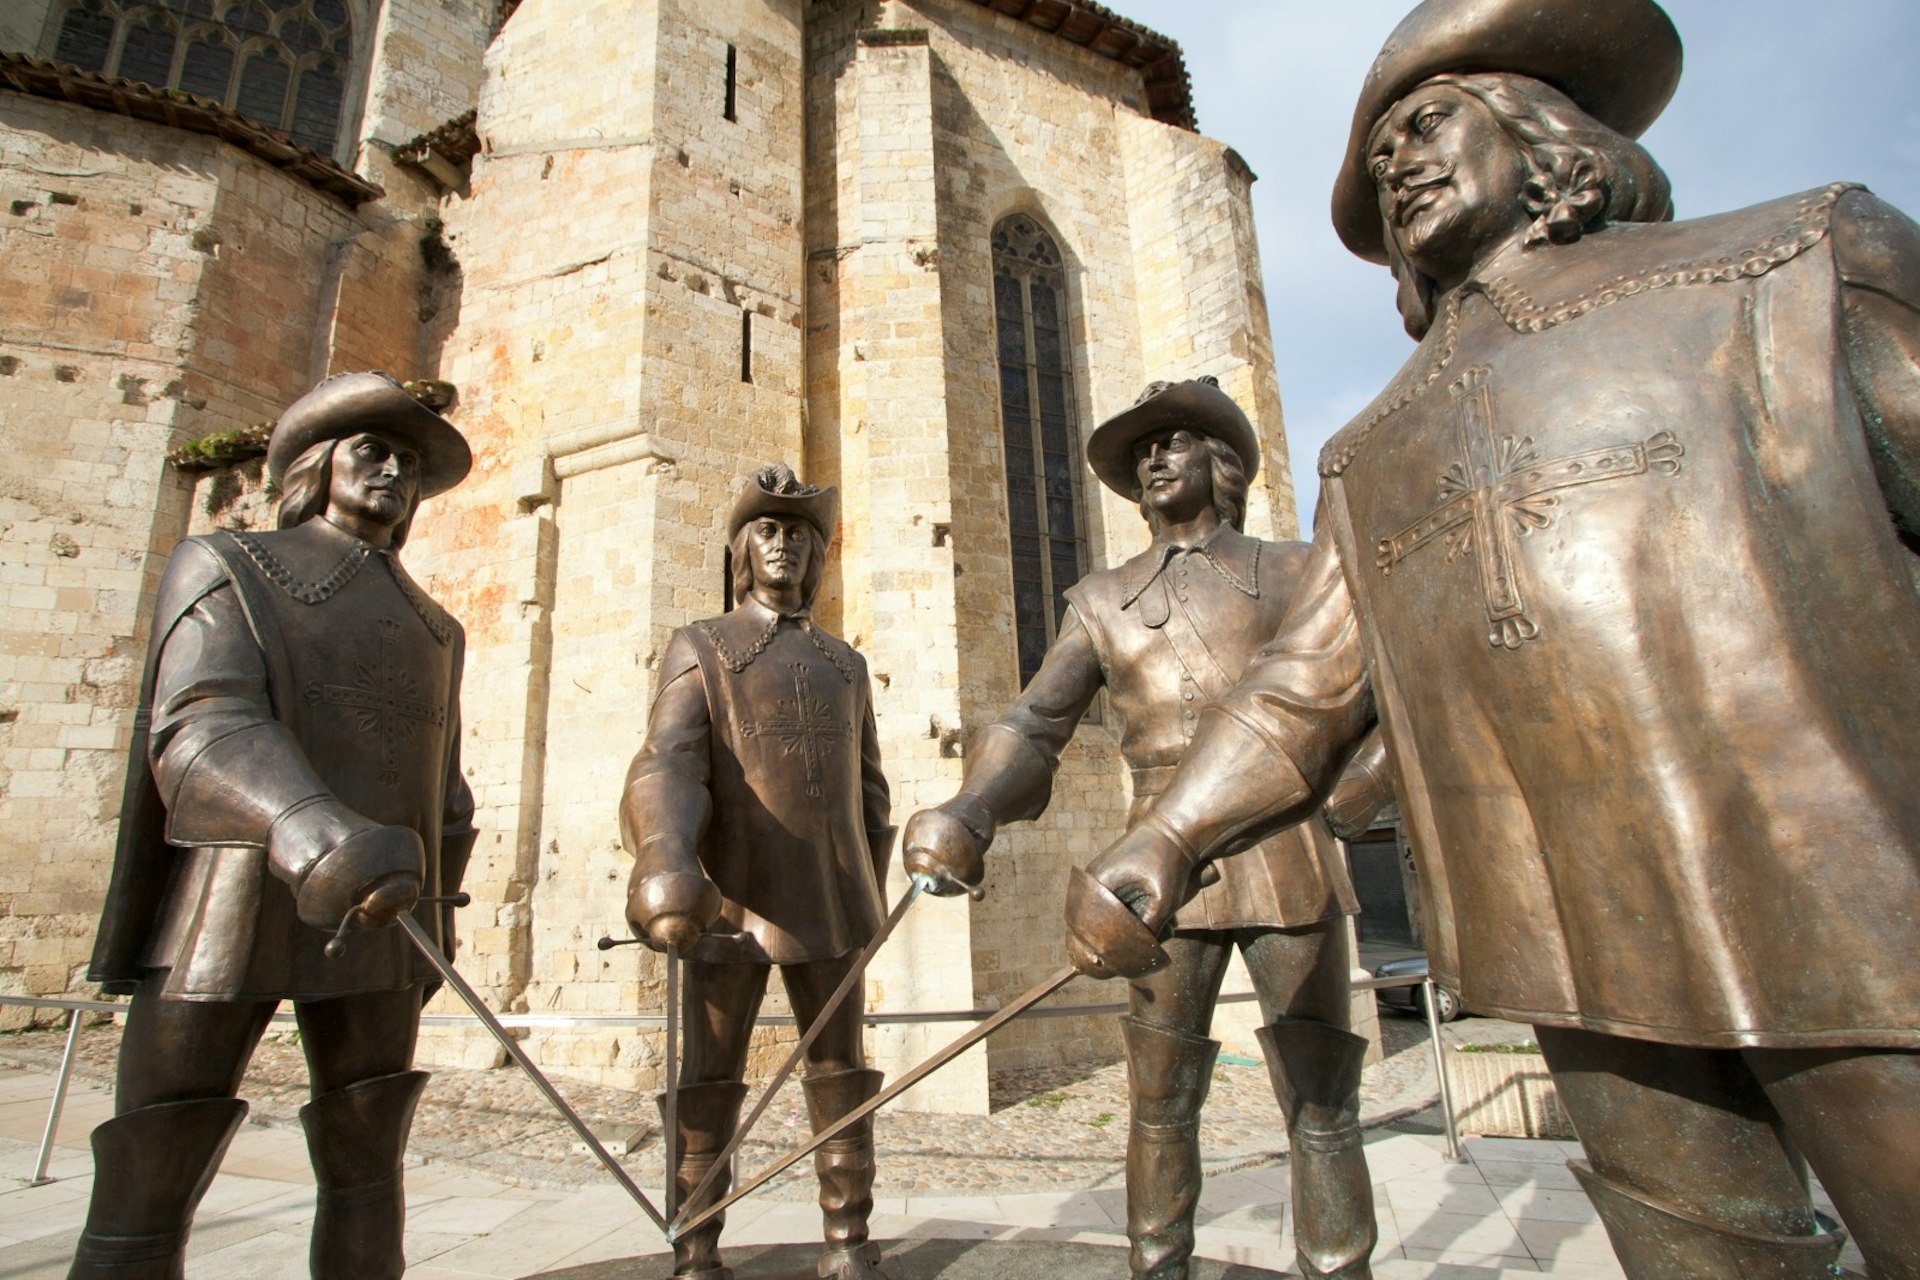 Statues of the musketeers stand guard outside Condom Cathedral, holding their sword blades together. Image © Alain Lauga / Shutterstock